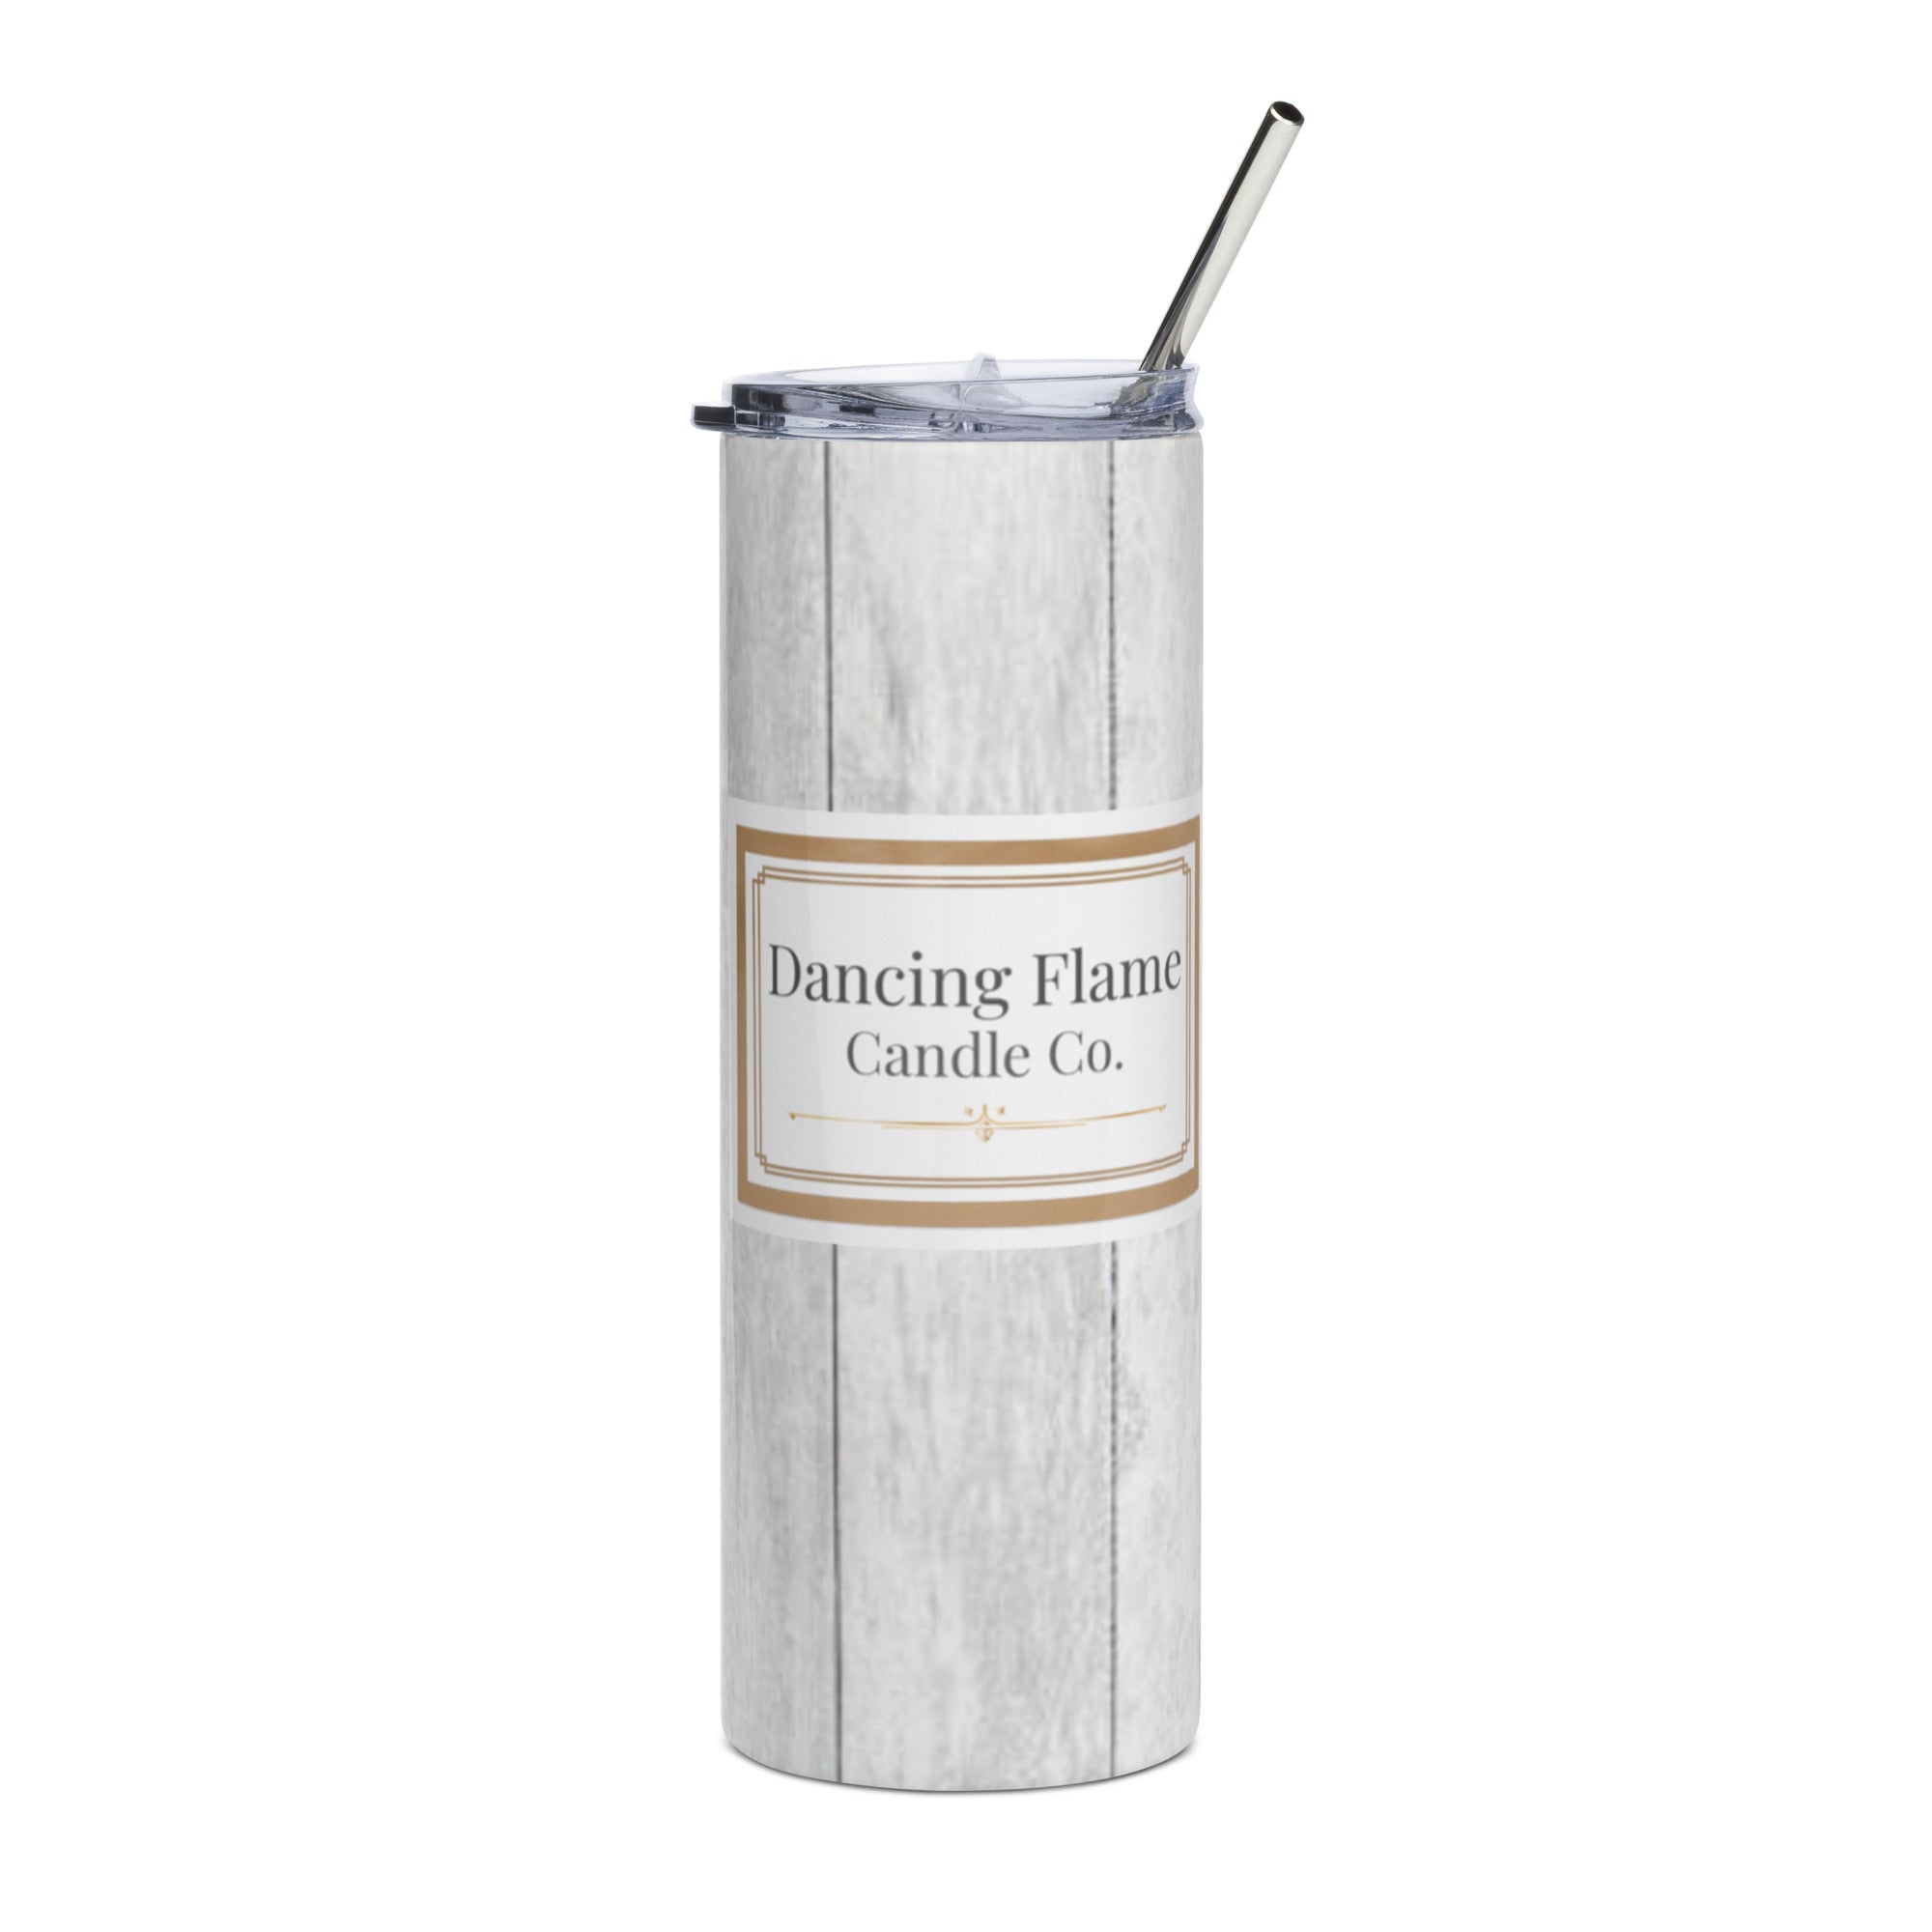 Stainless steel tumbler – Dancing Flame Candle Co.